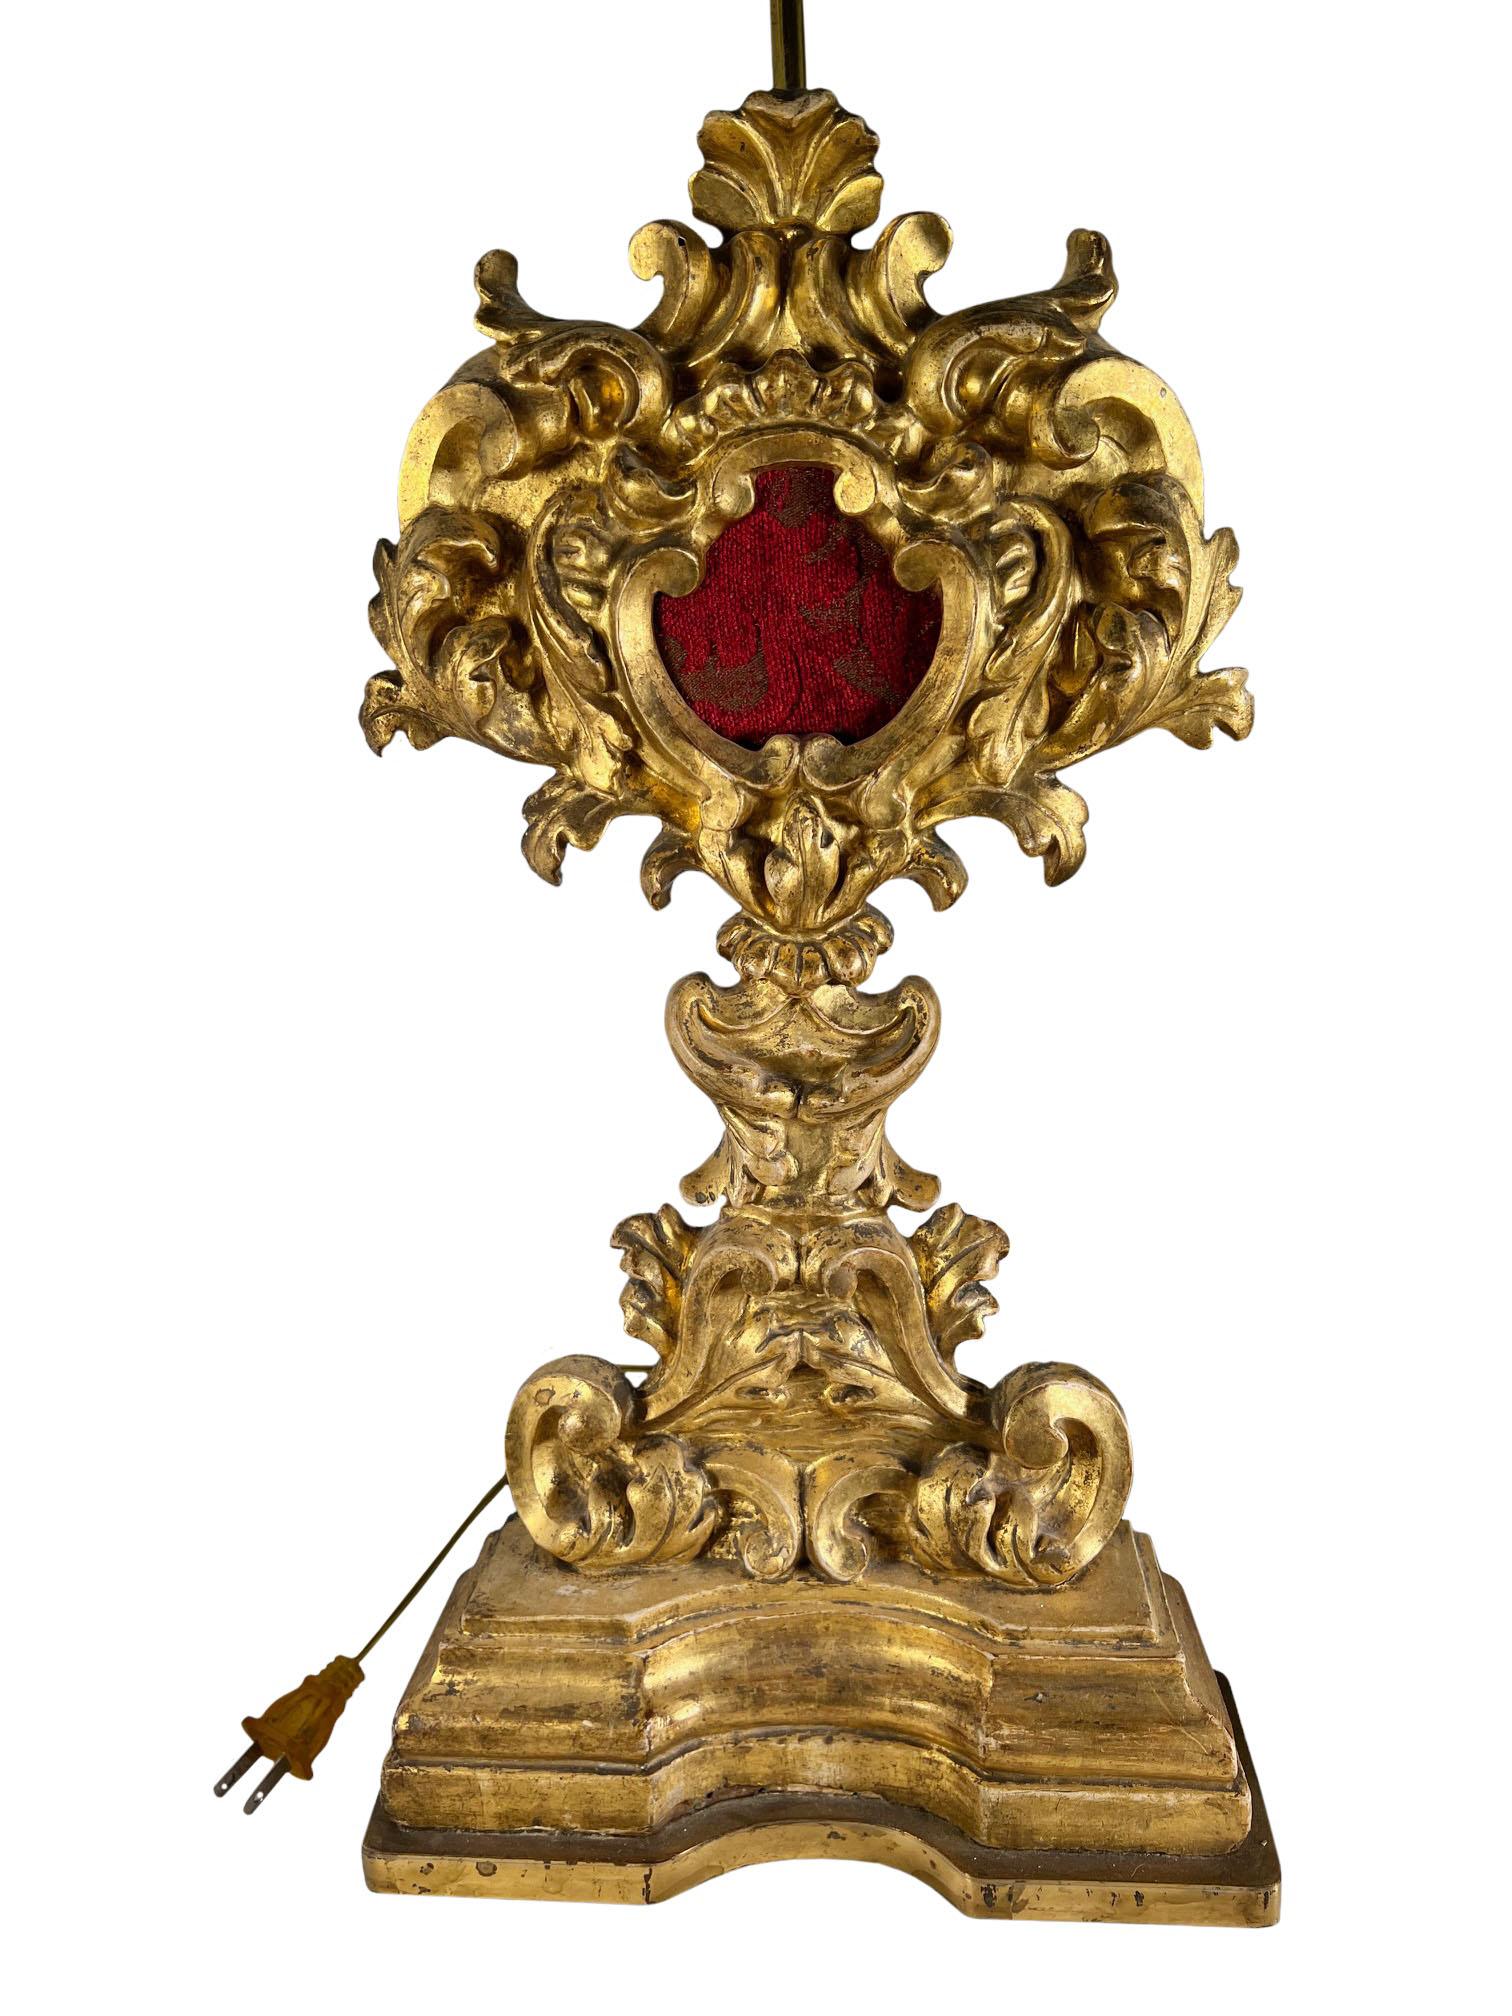 Italian reliquary holders surrounded by rococo carved and gilded wood with bronze dore bases.  Repurposed into lamps at a later date. Circa 1780 to 1820. The reliquary size only is seventeen and a half inches high.  